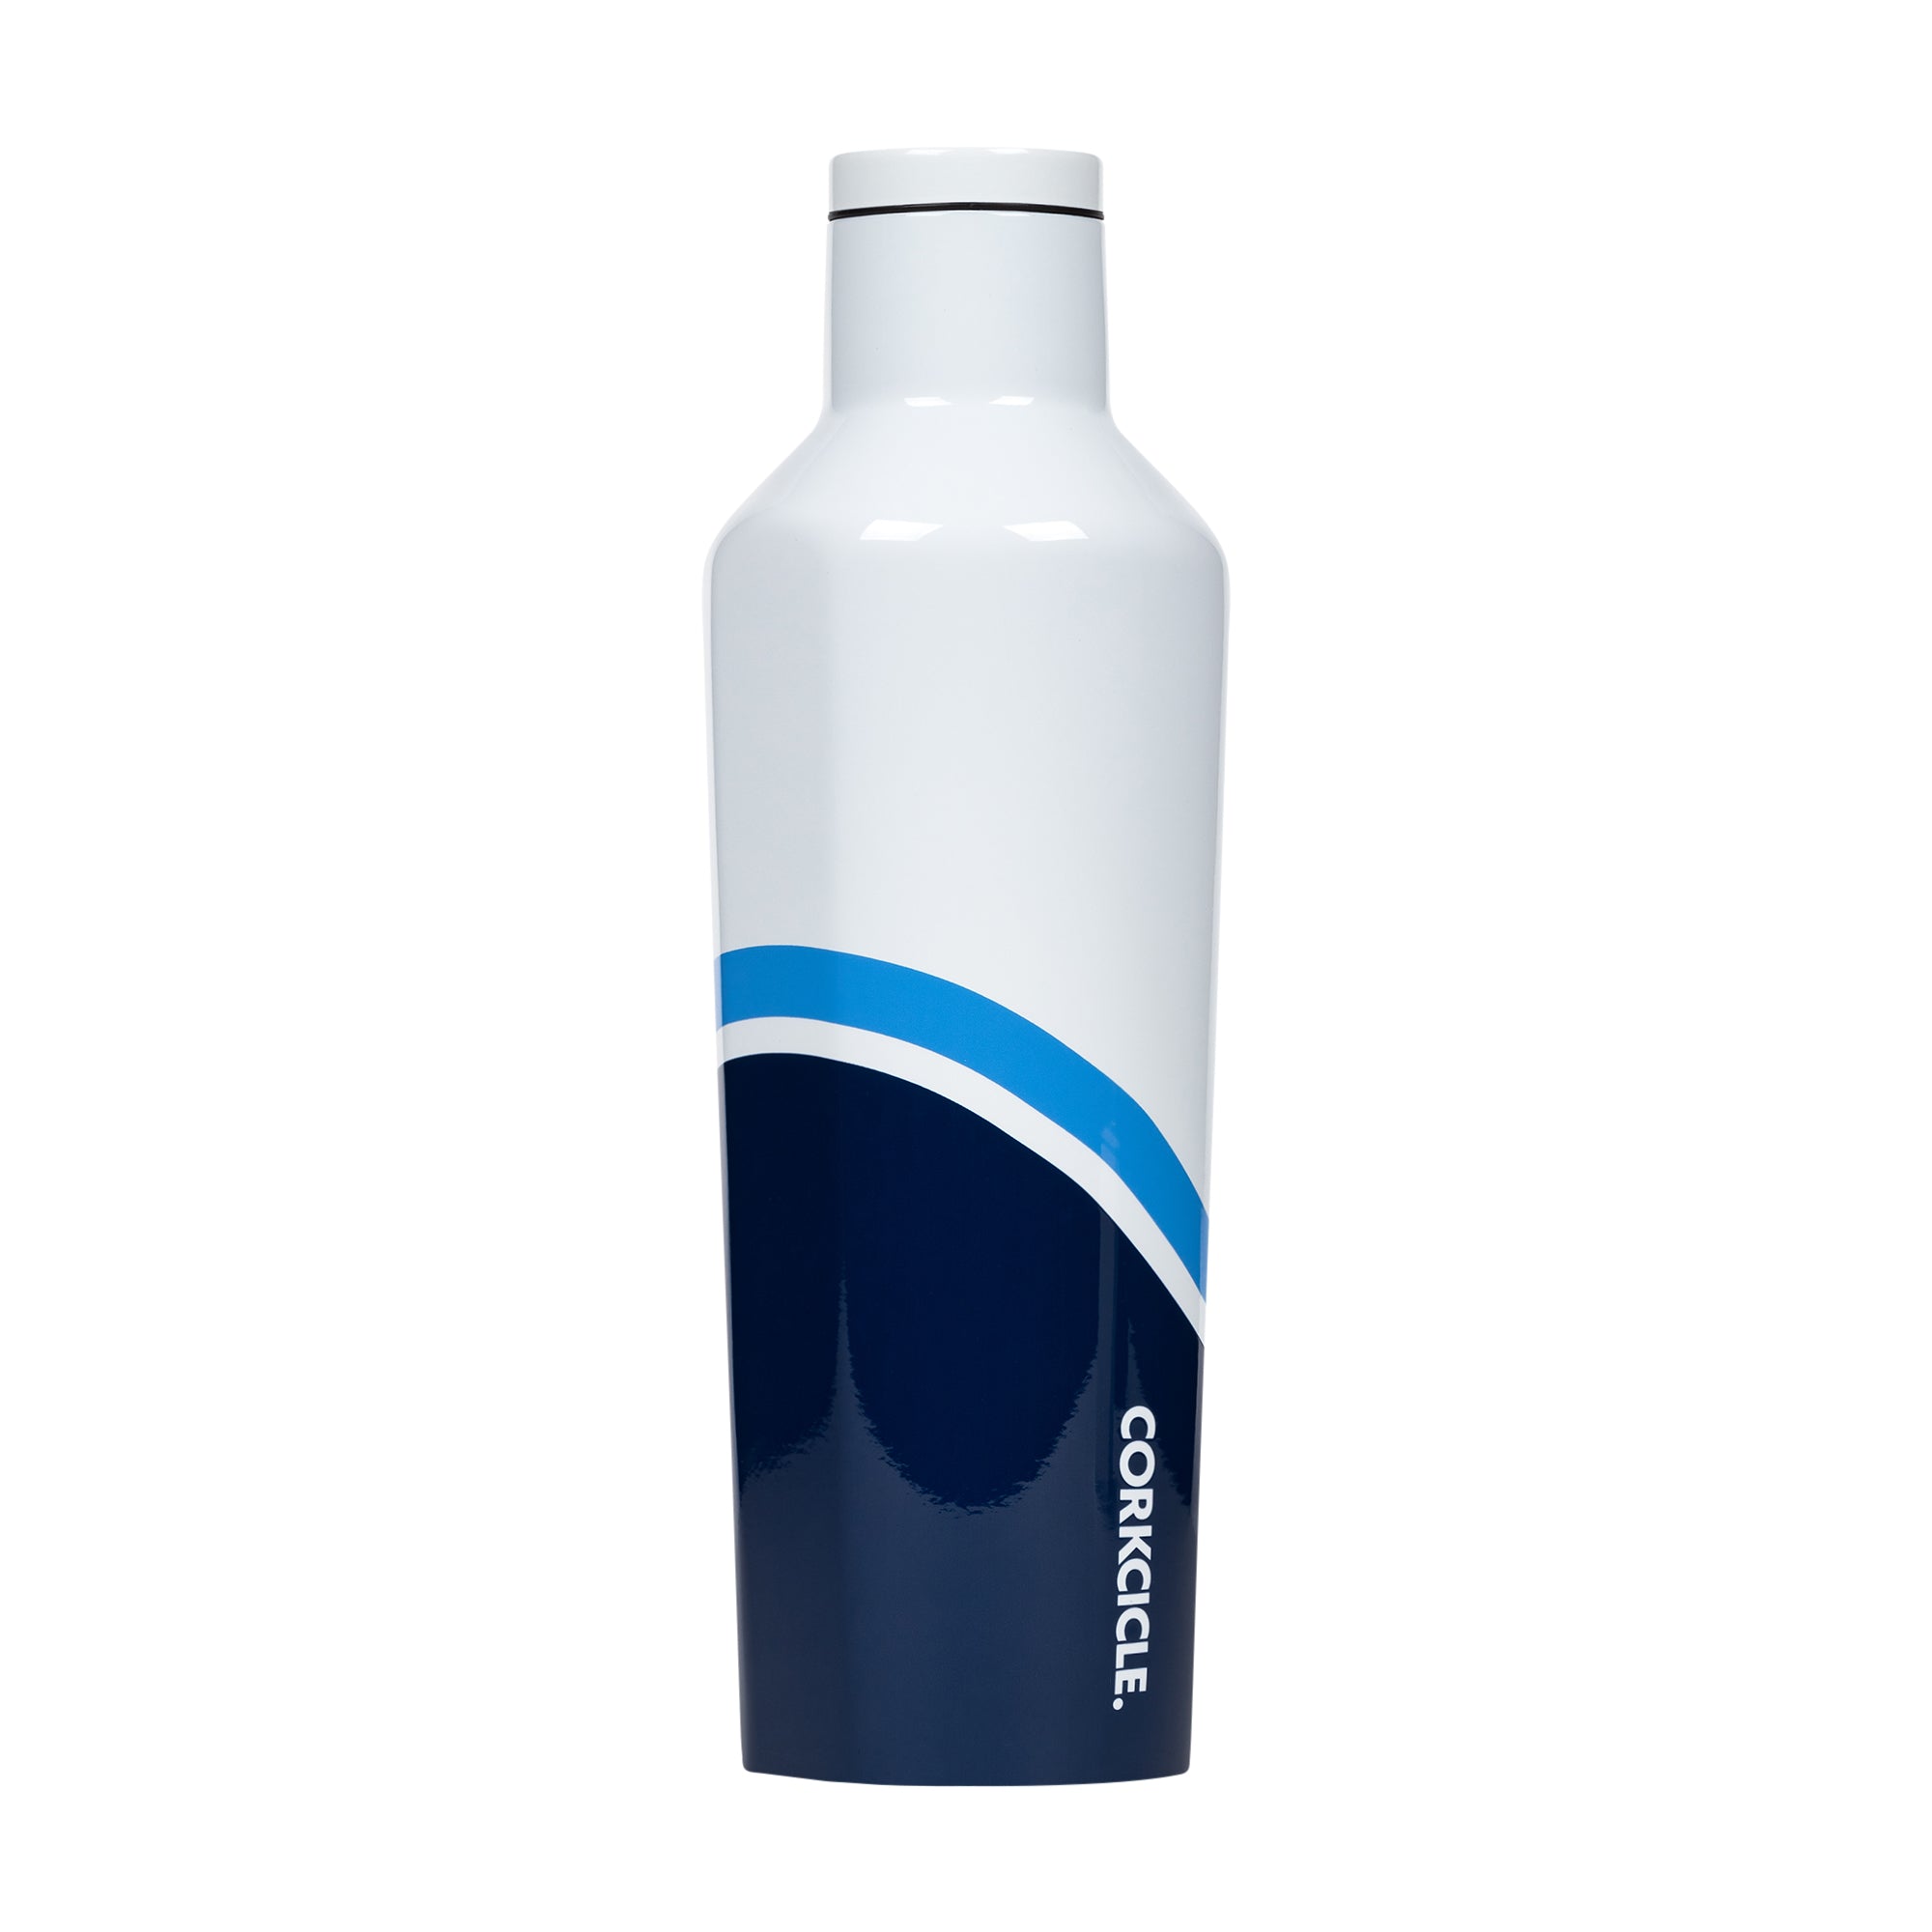 CORKCICLE *Exclusive* Stainless Steel Insulated Canteen 16oz (475ml) - Regatta Blue **CLEARANCE**